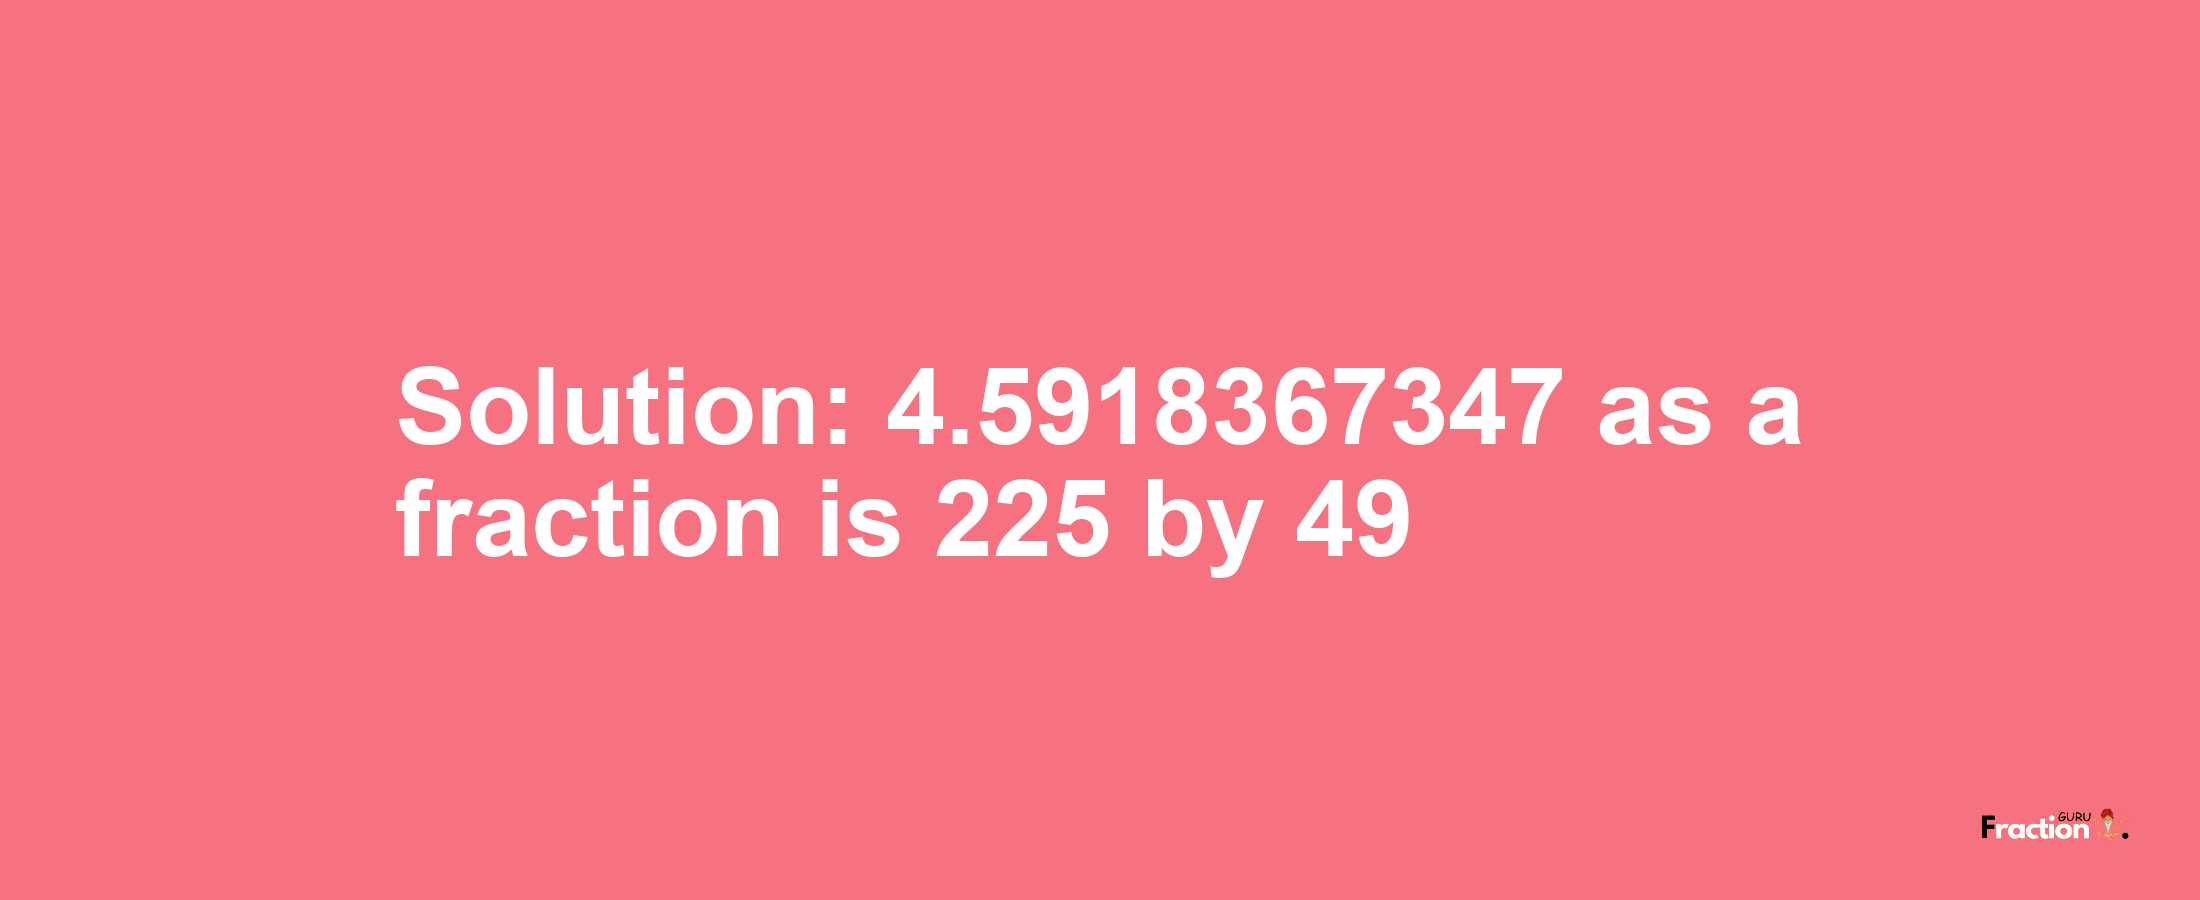 Solution:4.5918367347 as a fraction is 225/49